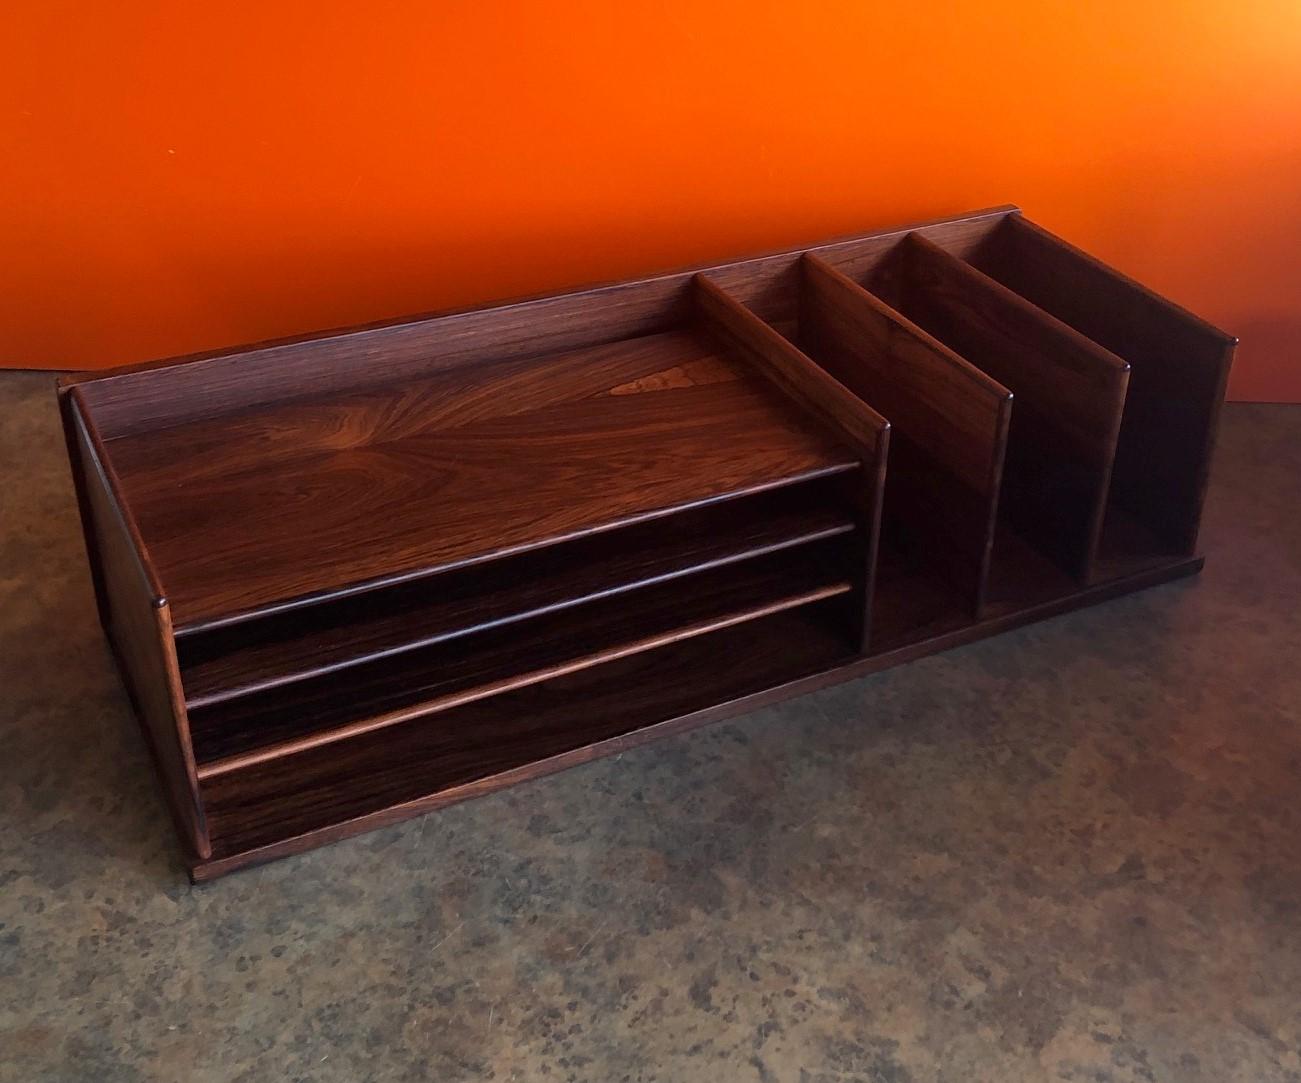 Mid-Century Modern Danish Modern Desk Organizer or Letter Tray in Rosewood by Georg Petersens